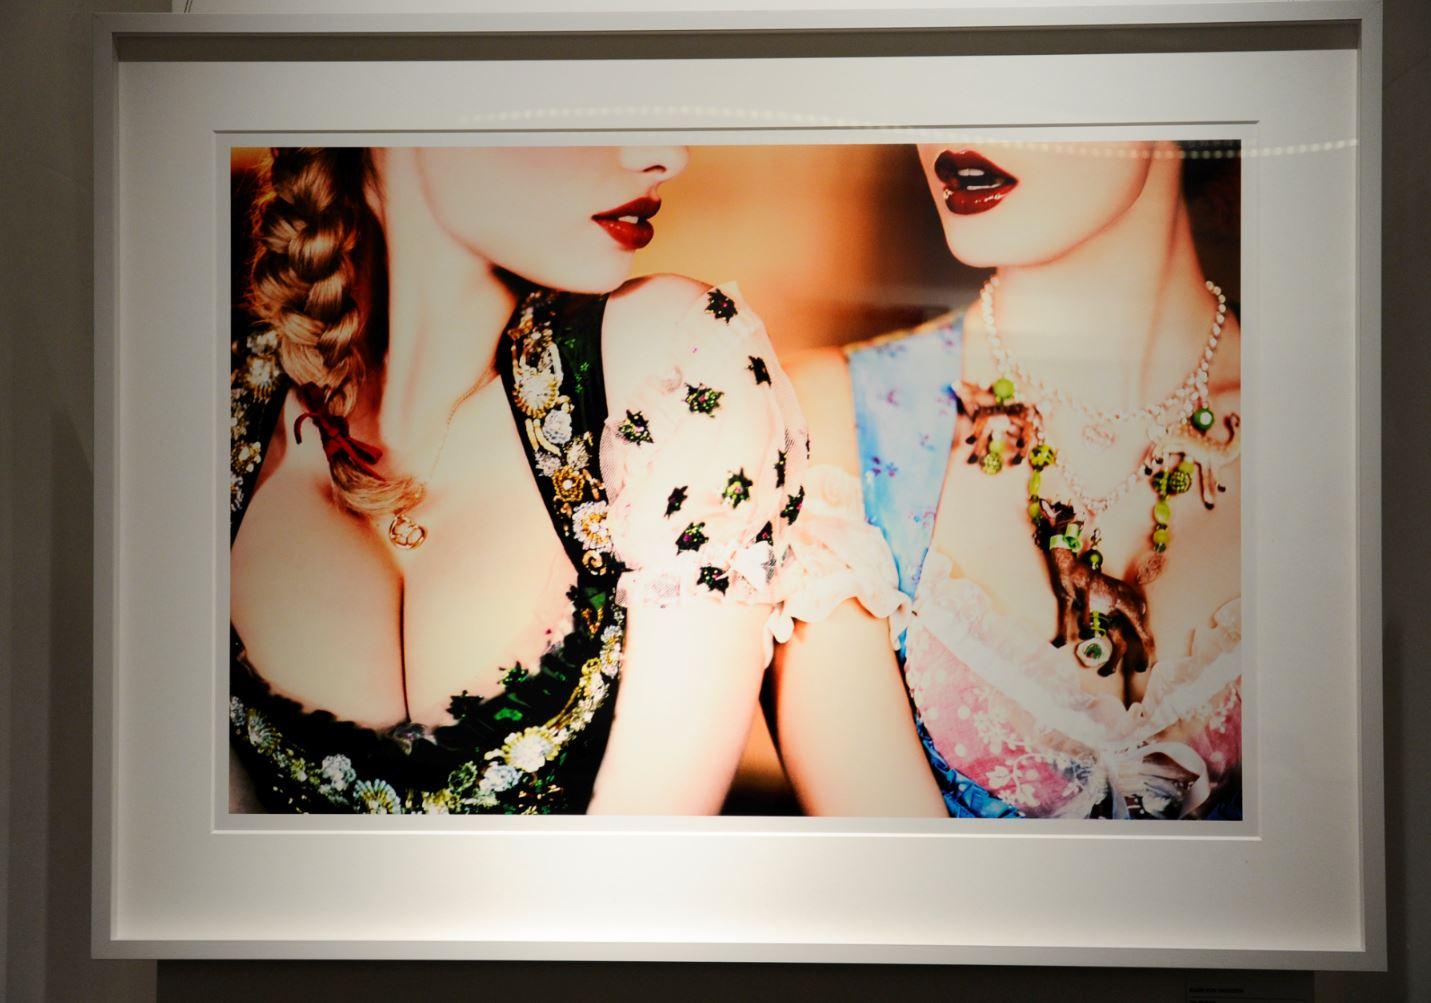 Necklace - portrait of two models showing cleavage in traditional Bavarian dress - Photograph by Ellen von Unwerth